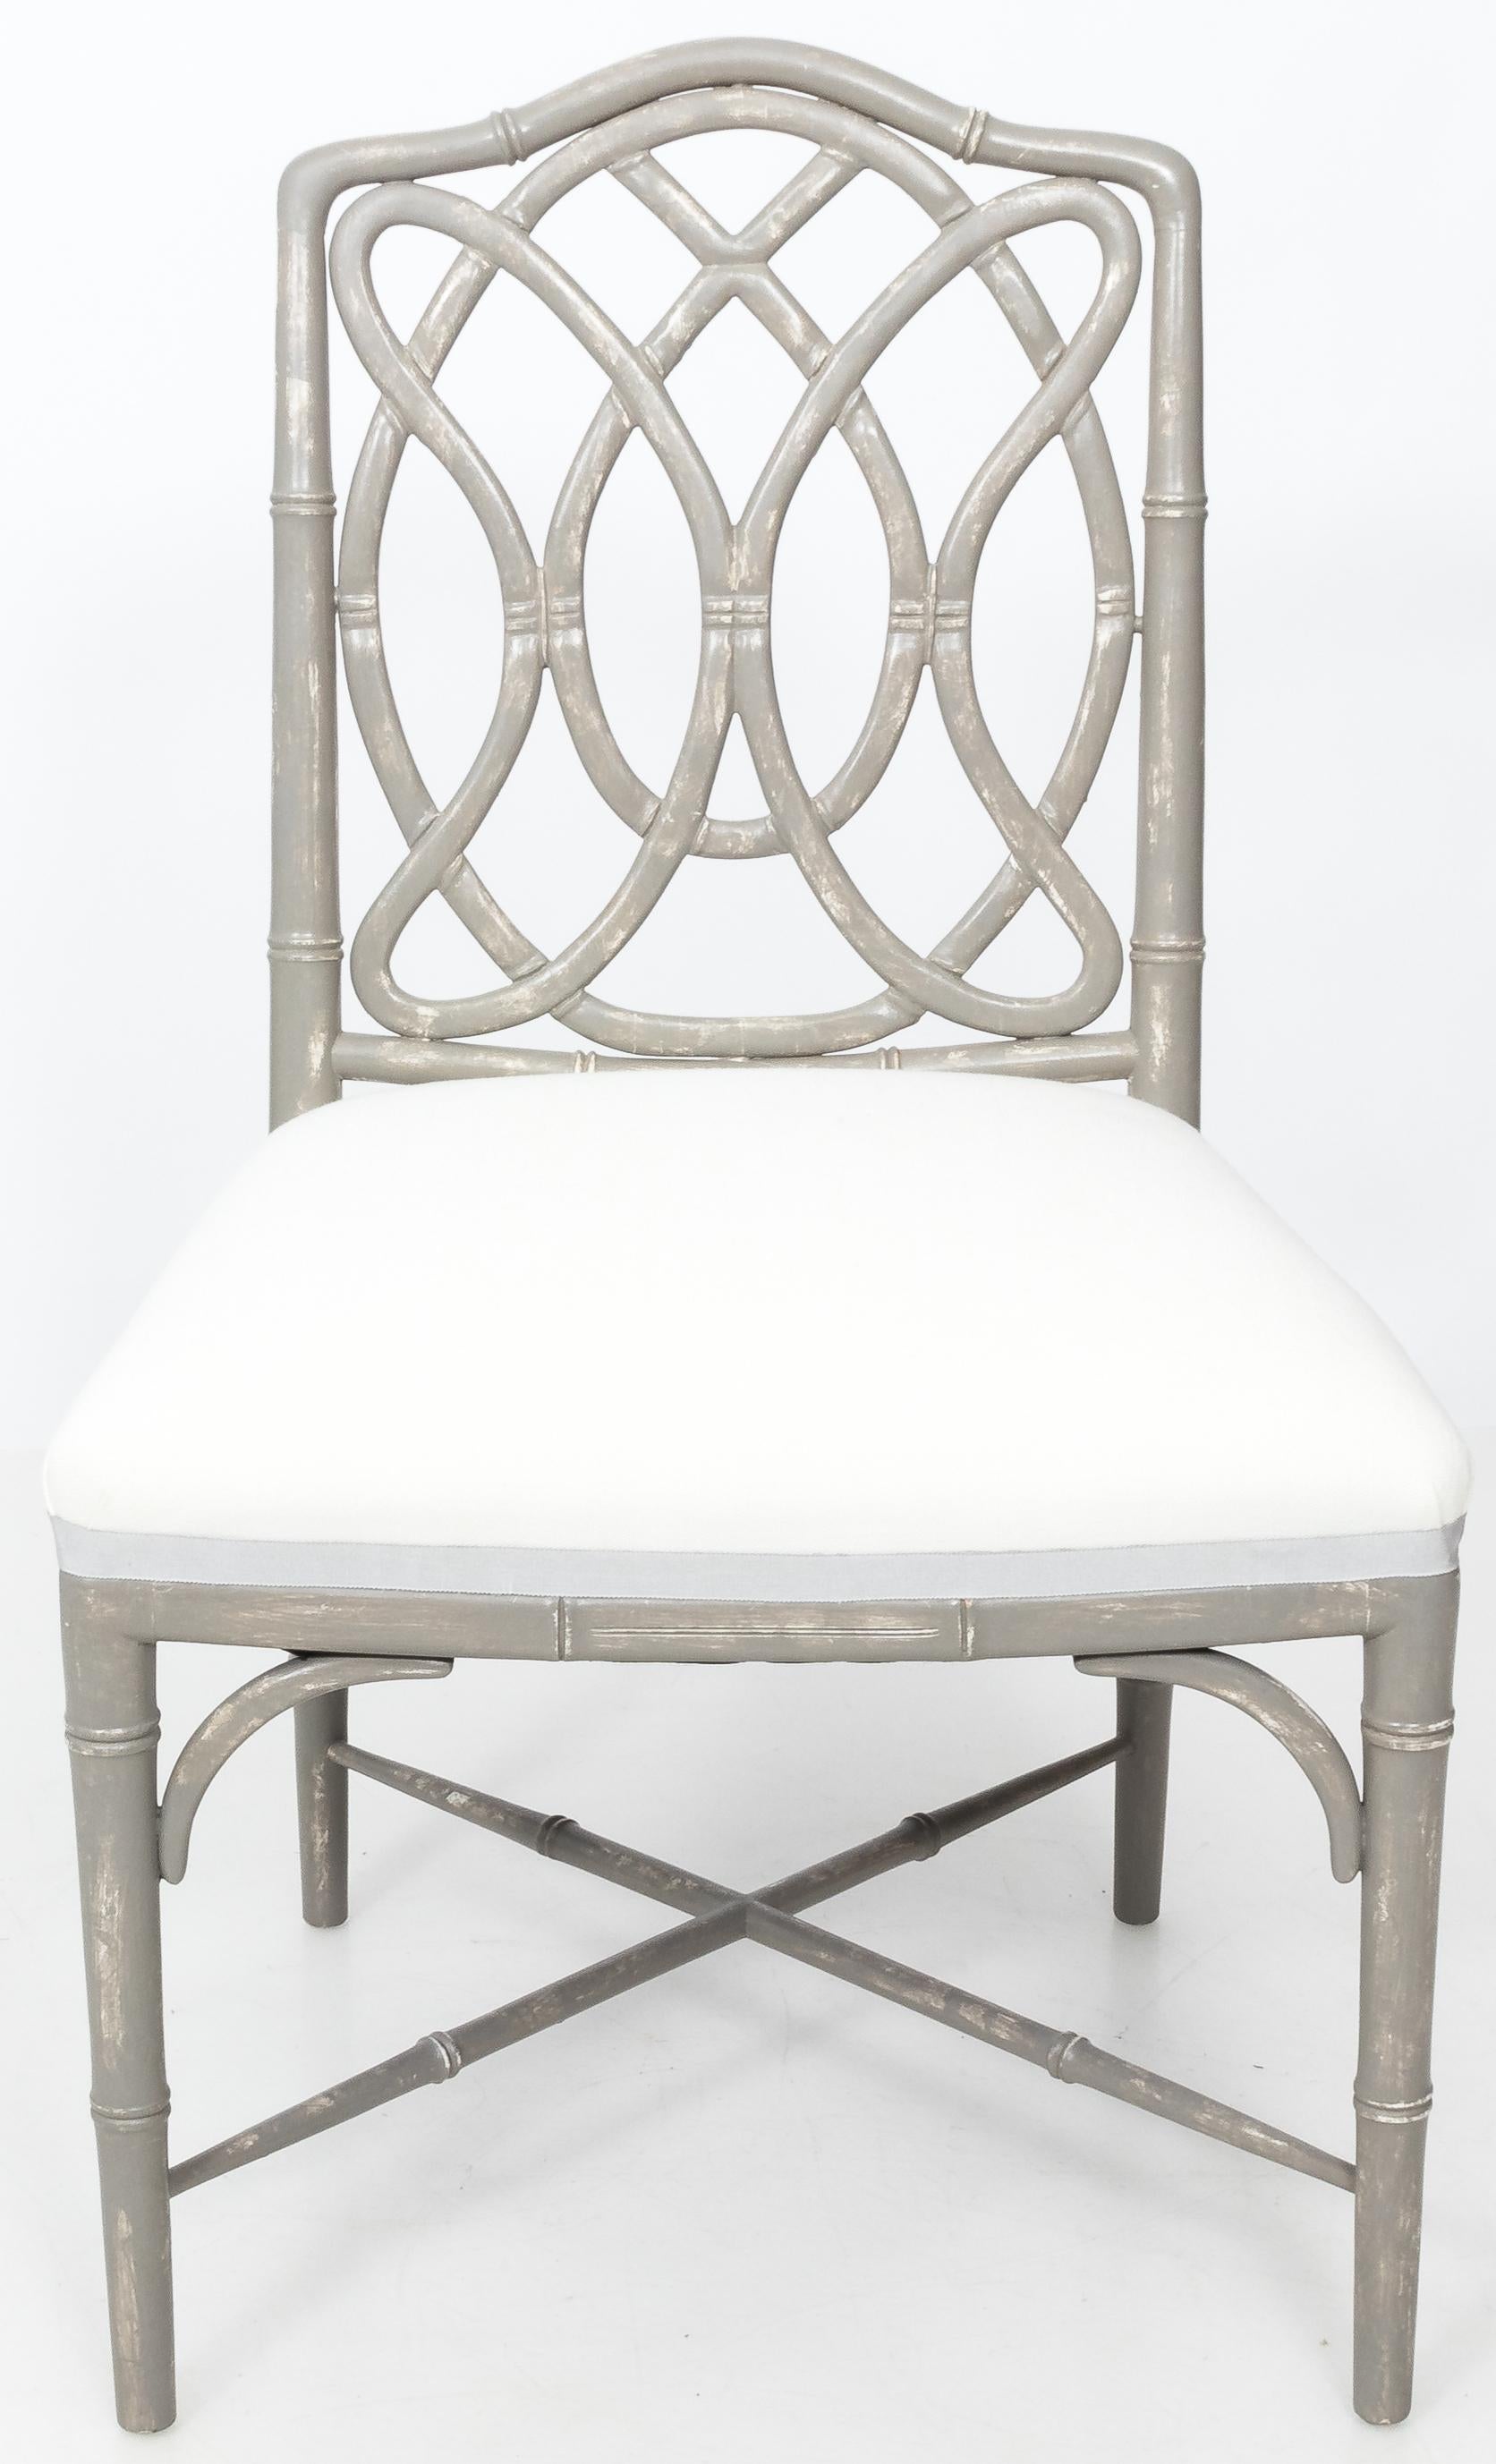 Pair of faux bamboo dining chairs. Loop back design. Newly refinished in antique distressed gray painted finish. Newly upholstered in white linen with gray tape trim.
Priced per pair. 4 chairs available.